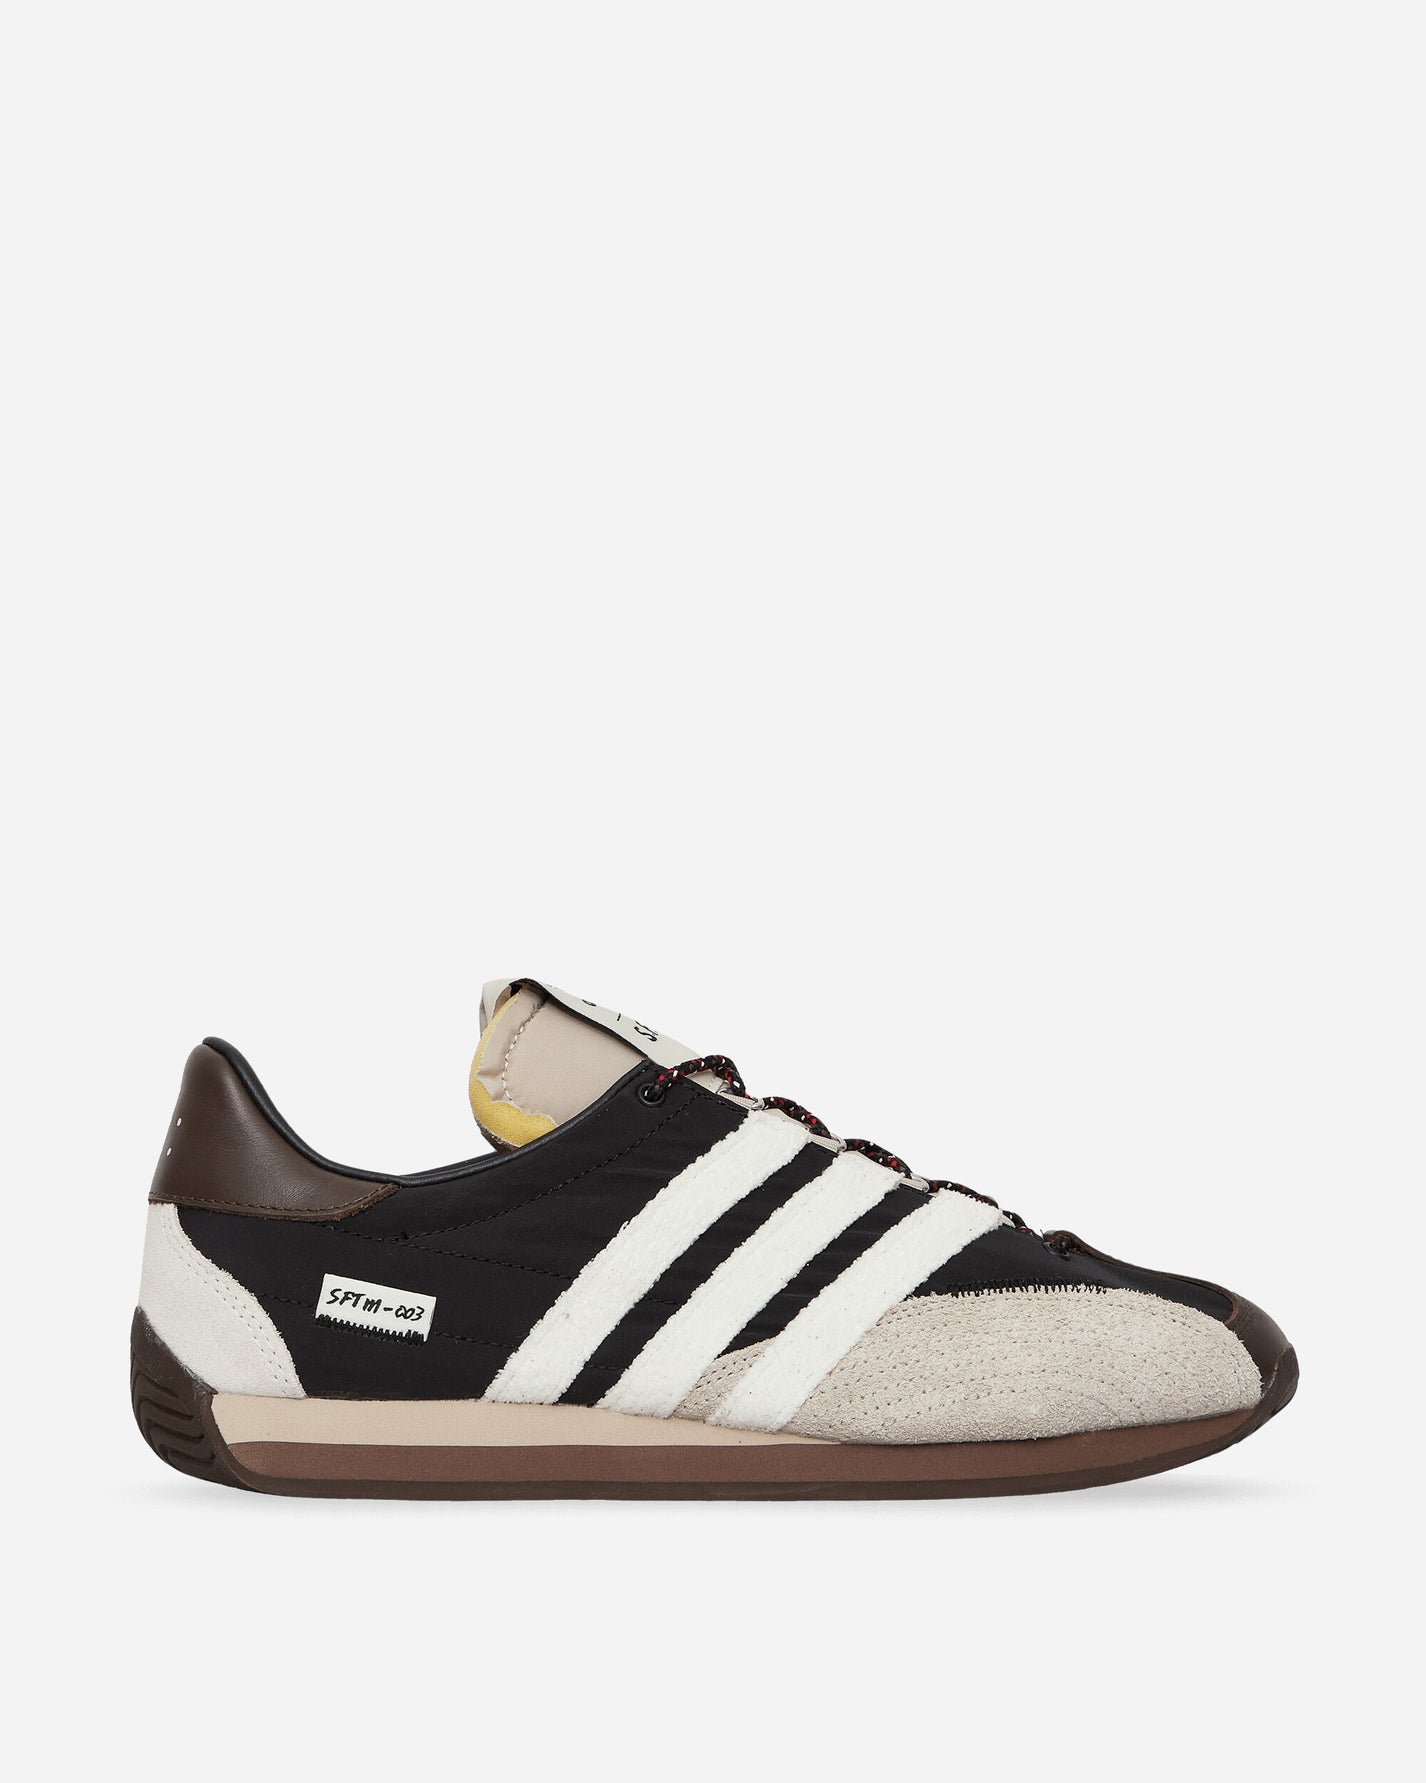 adidas Country Og Sftm Core Black/Core White Sneakers Low ID3546 001